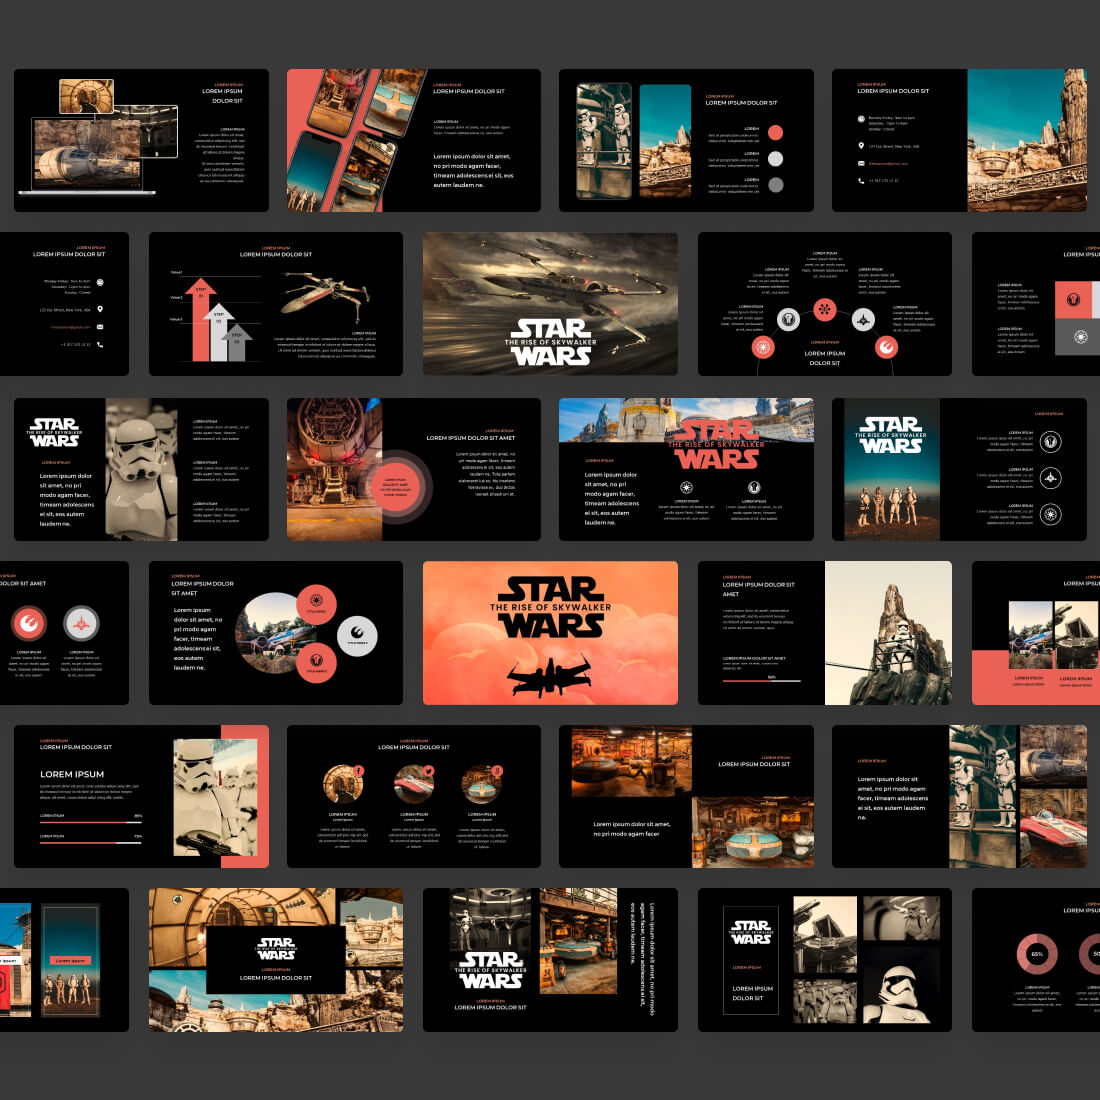 XWing Star Wars Keynote Template cover.